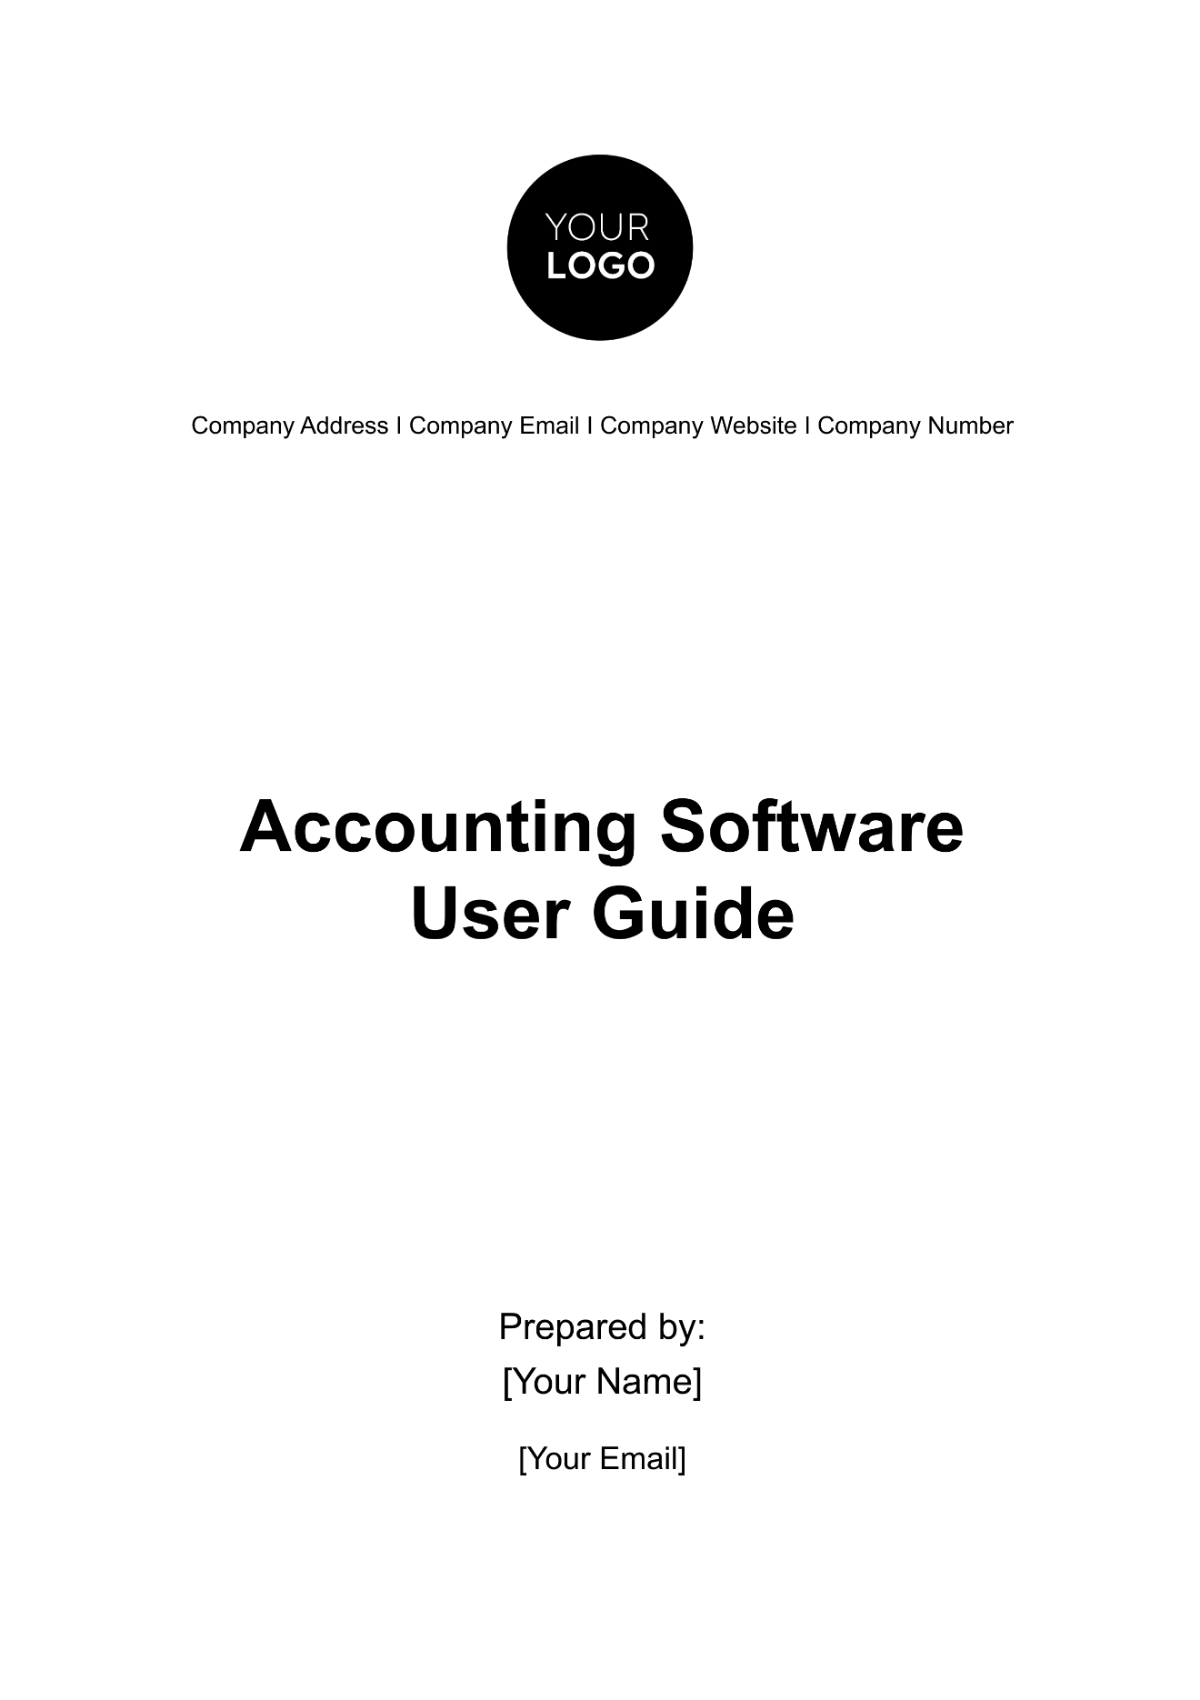 Accounting Software User Guide Template